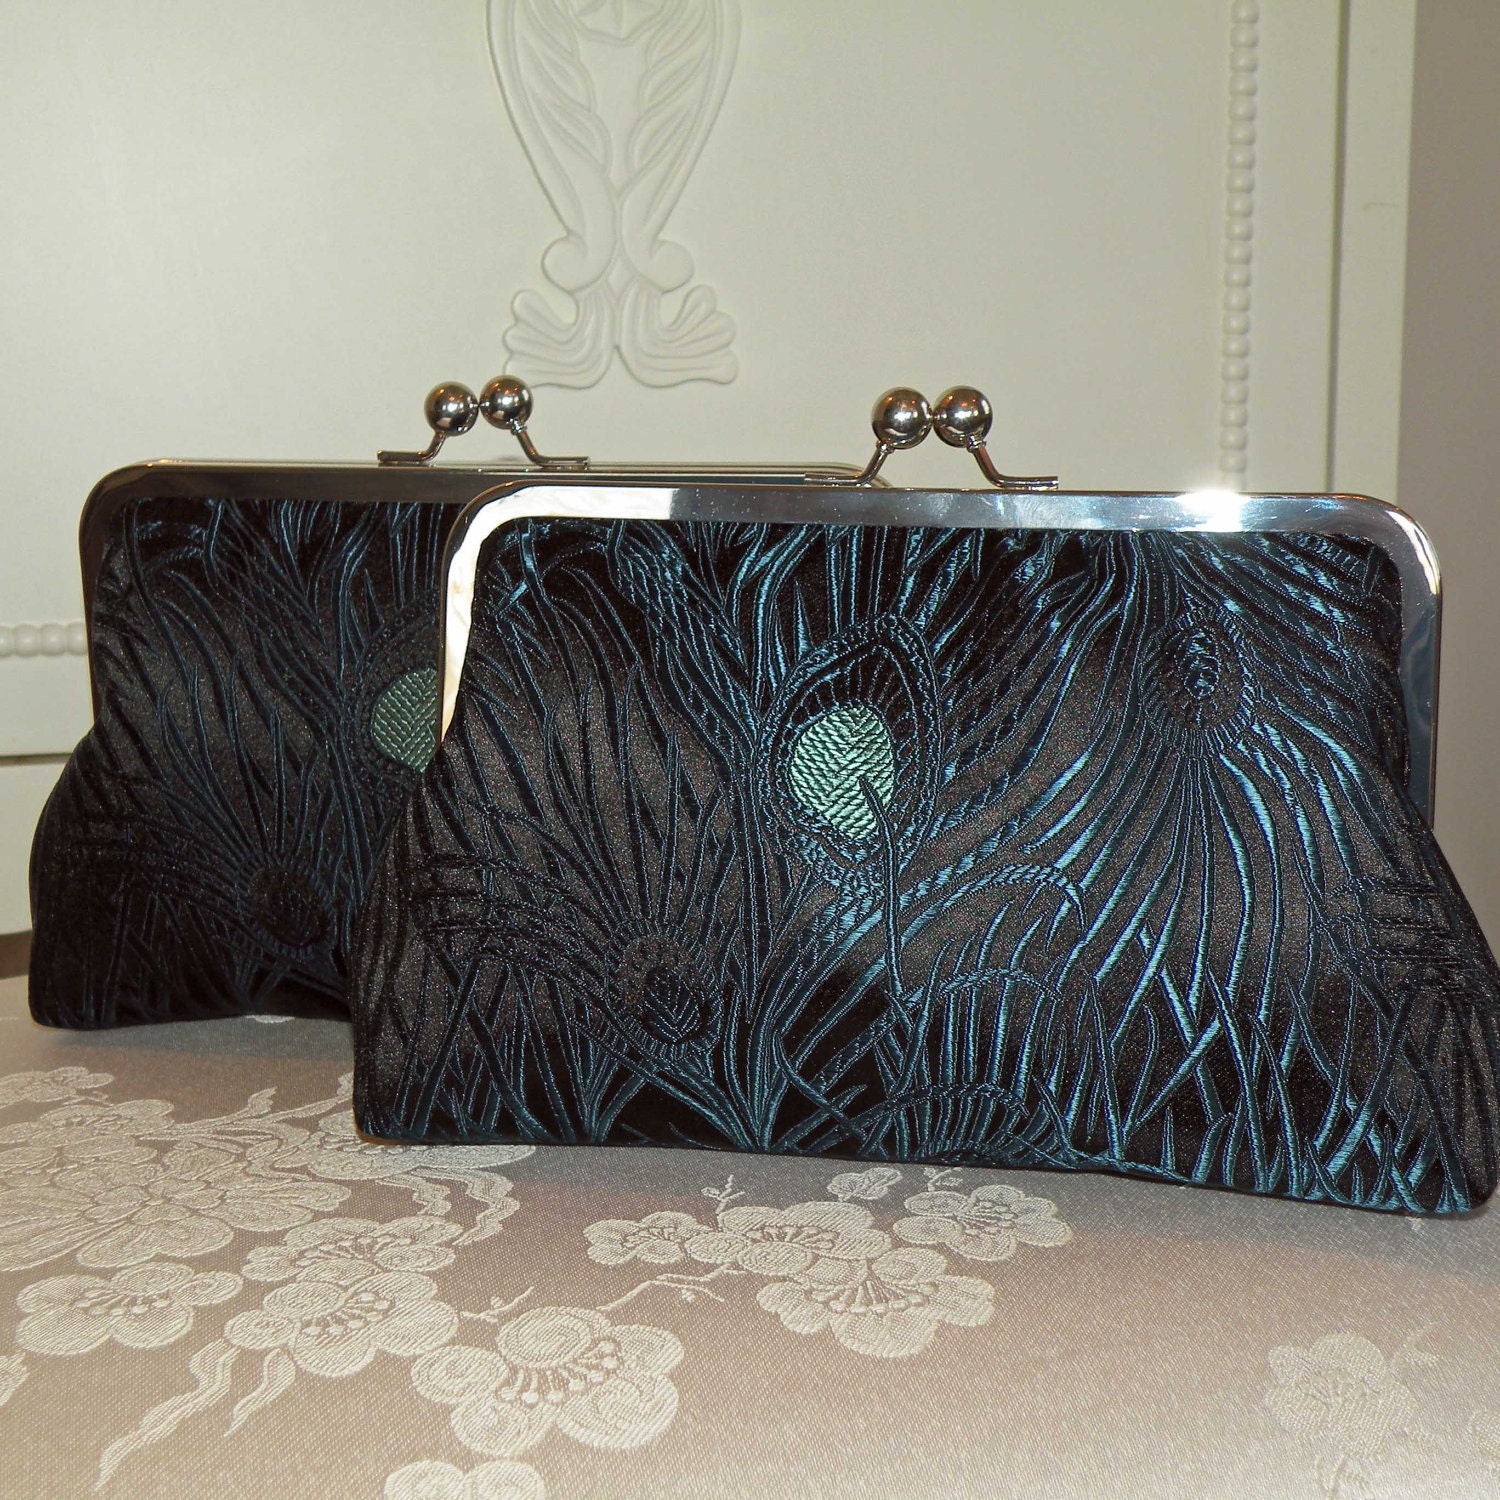 Peacock Feather Clutch/Purse/Bag.. Silk Brocade..Black/Blue/Torquoise..Wrap available..Free Monogram